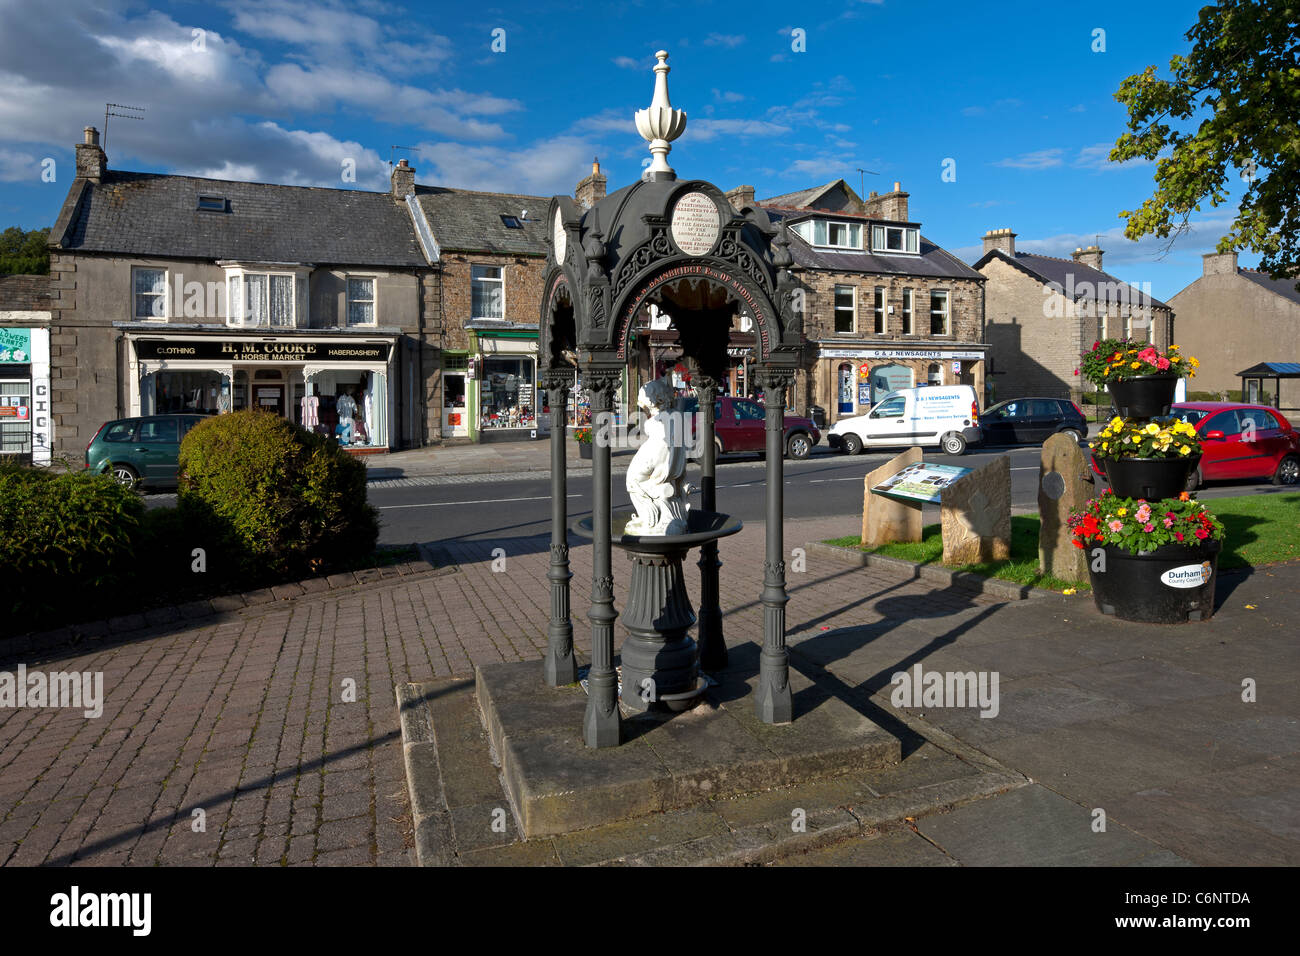 The market town of Middleton-in-Teesdale in County Durham, with a cast iron canopied drinking fountain in centre of the image Stock Photo